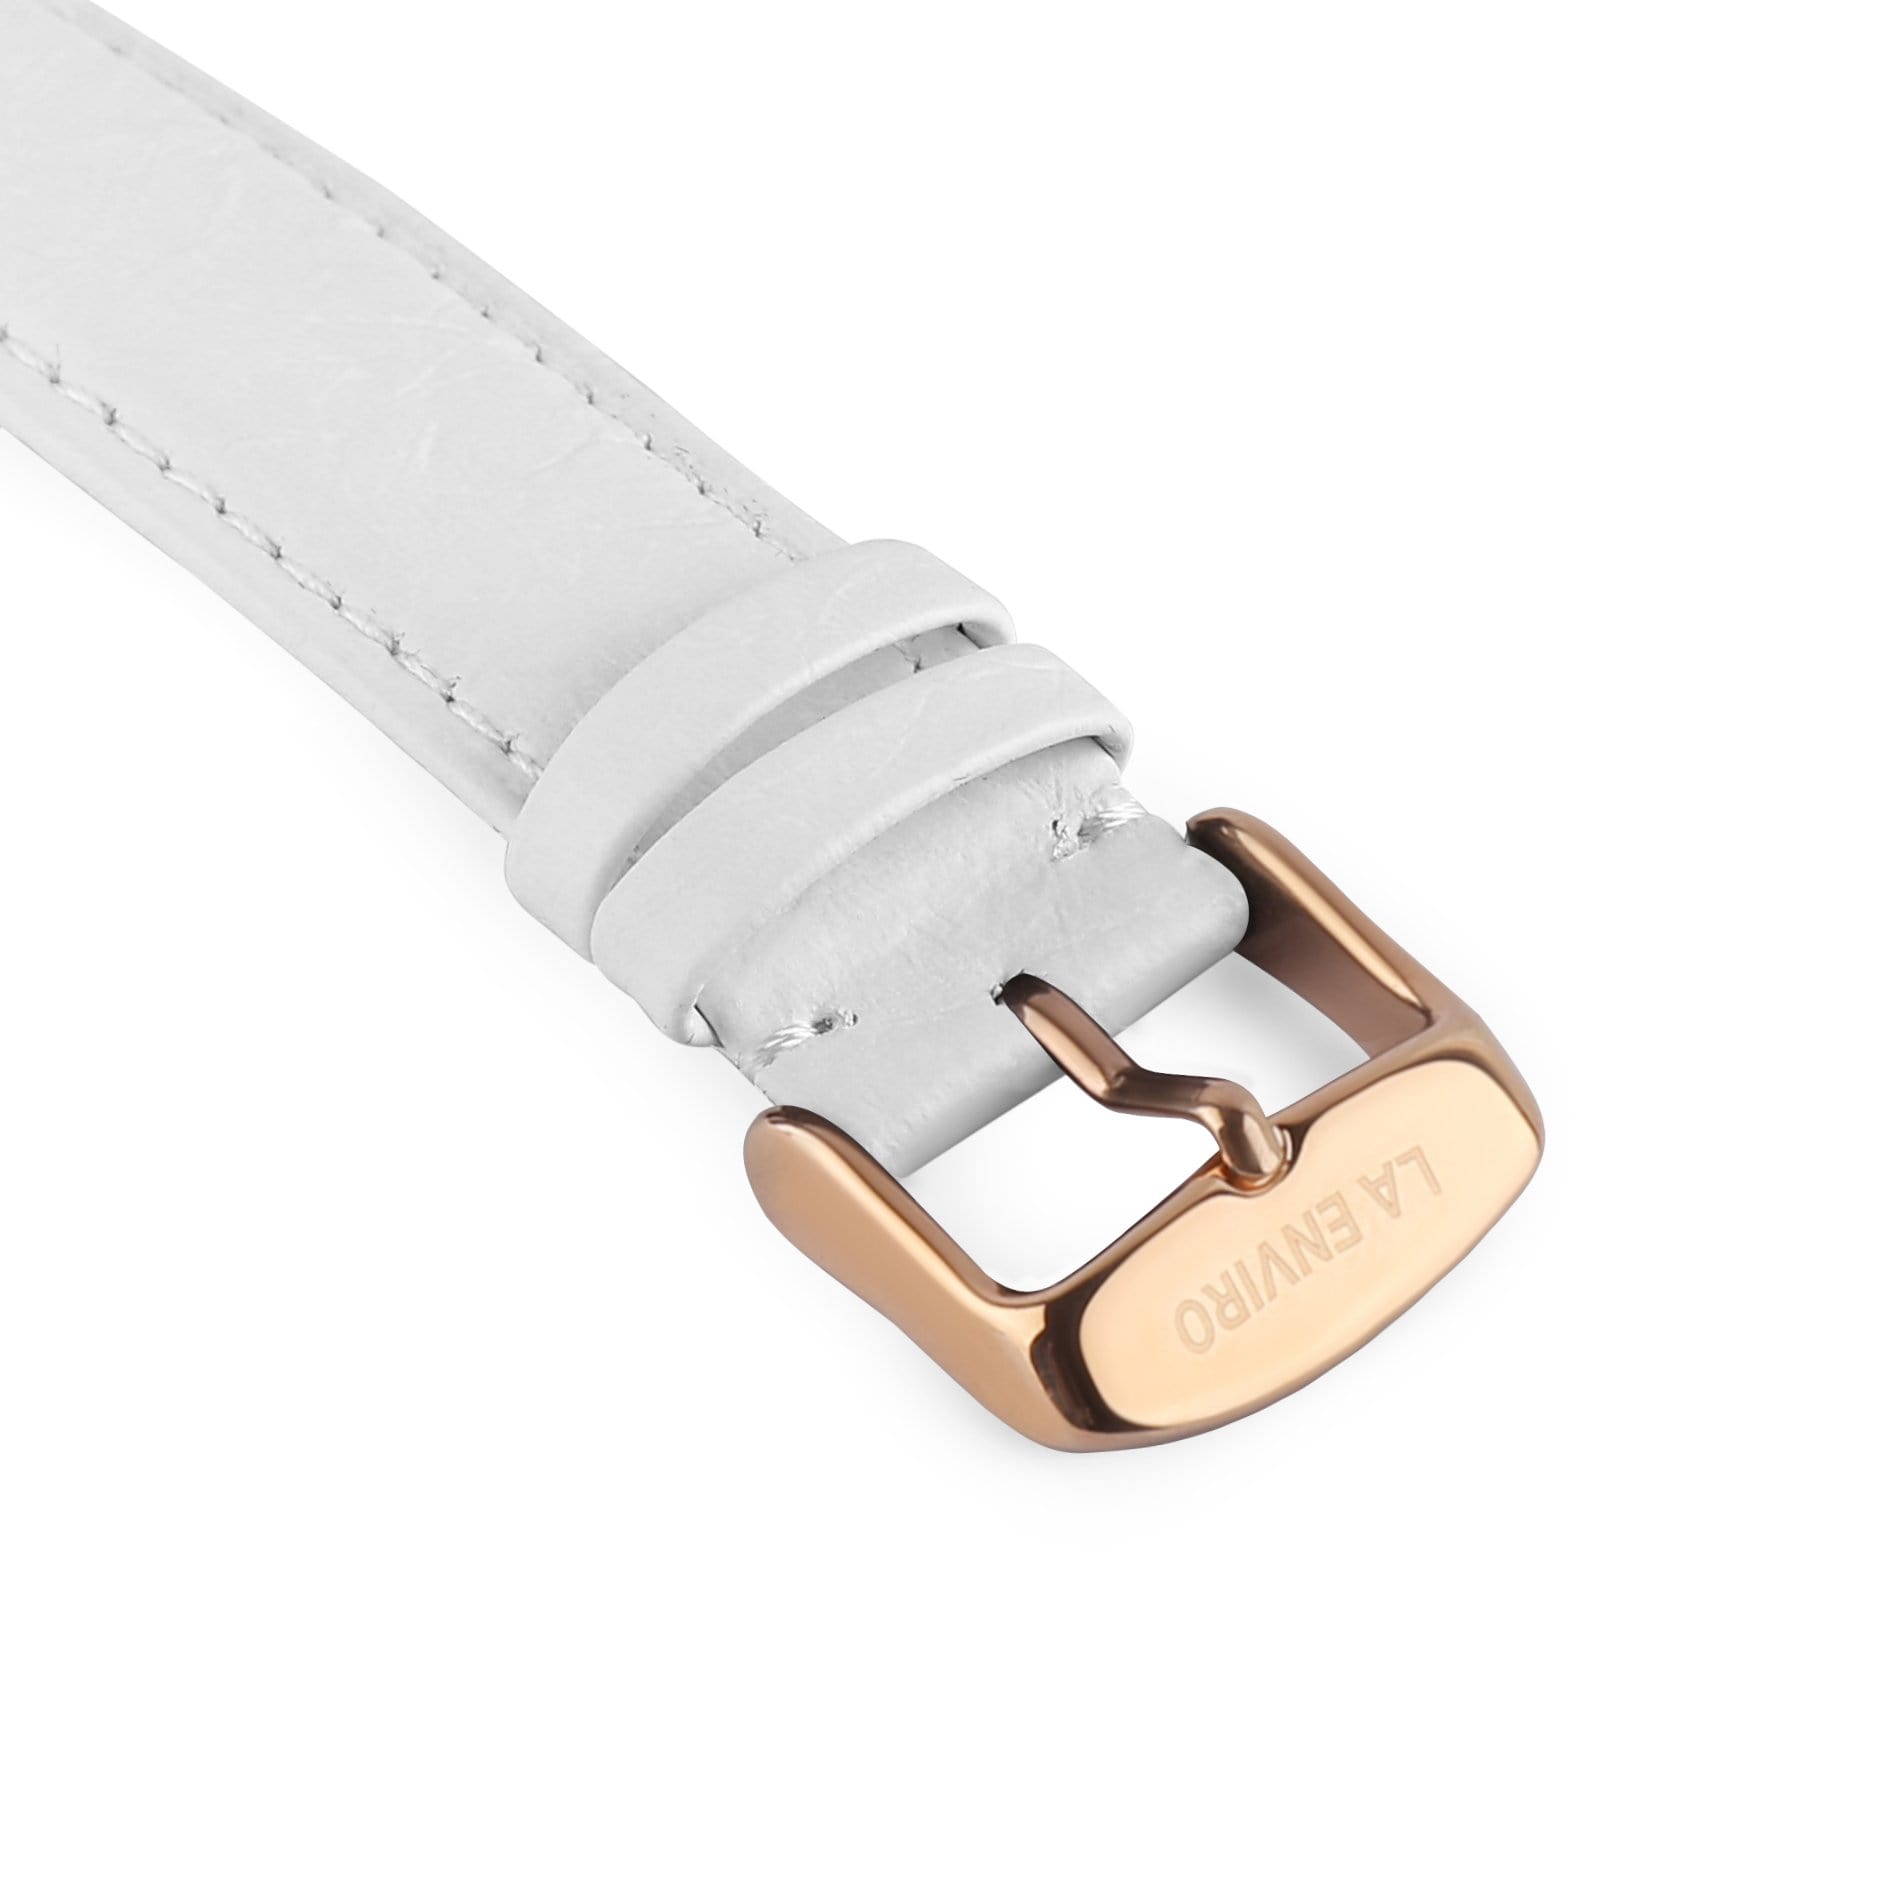 PINEAPPLE LEATHER ROSE GOLD WITH WHITE STRAP I TIERRA 40 MM-La Enviro-stride